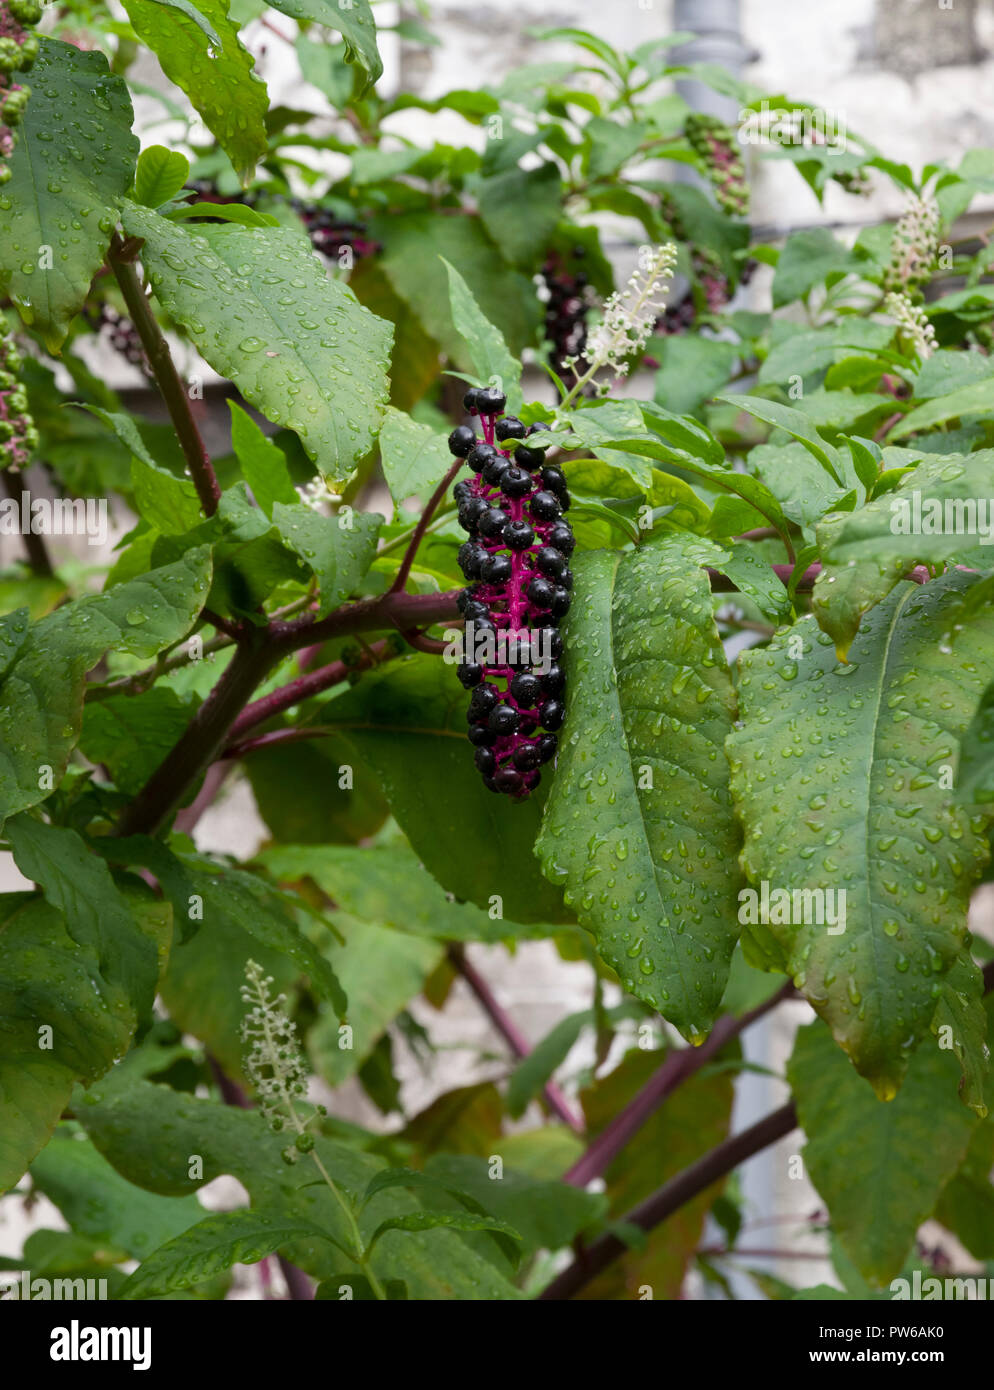 American pokeweed bacche mature Foto Stock